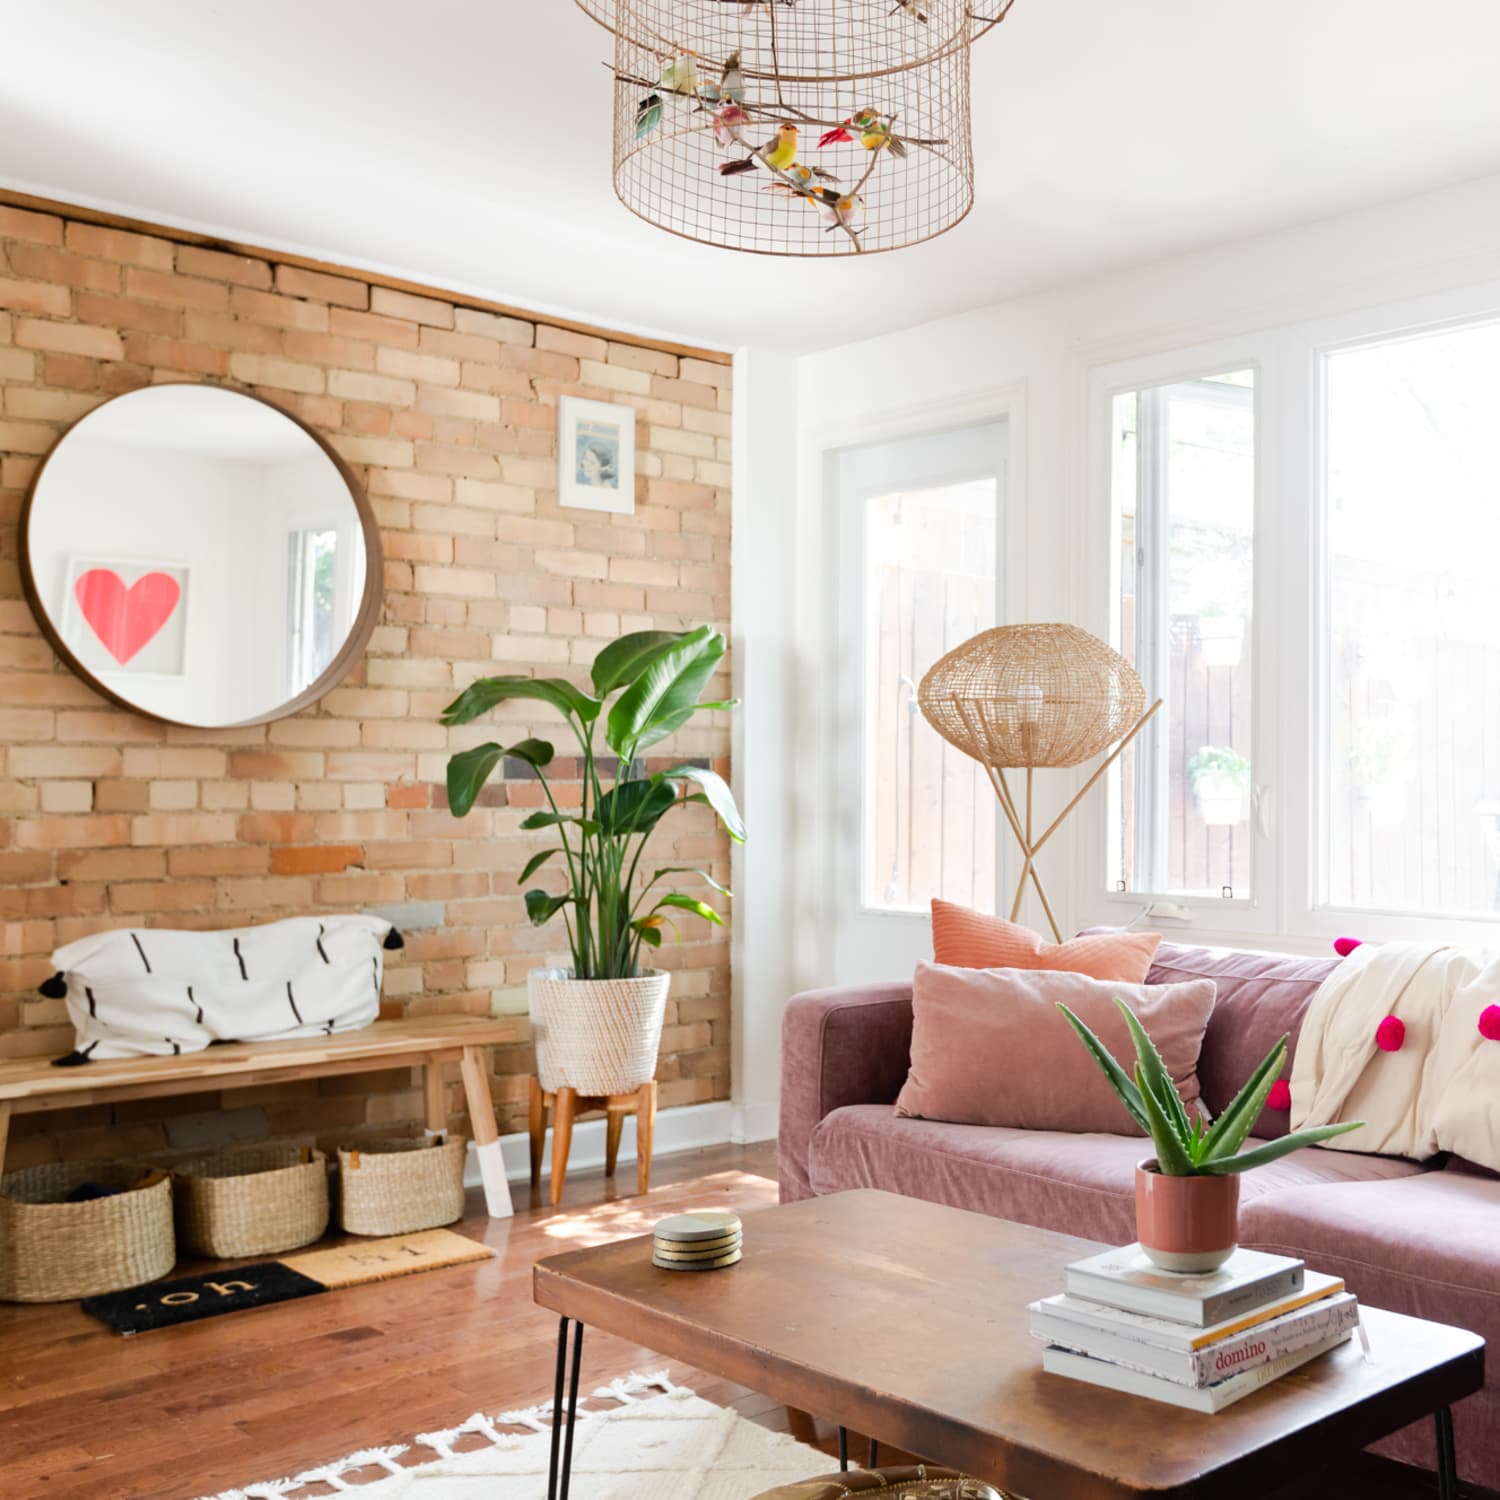 Essential Checklist For Your Pinterest-Worthy Living Room Interior